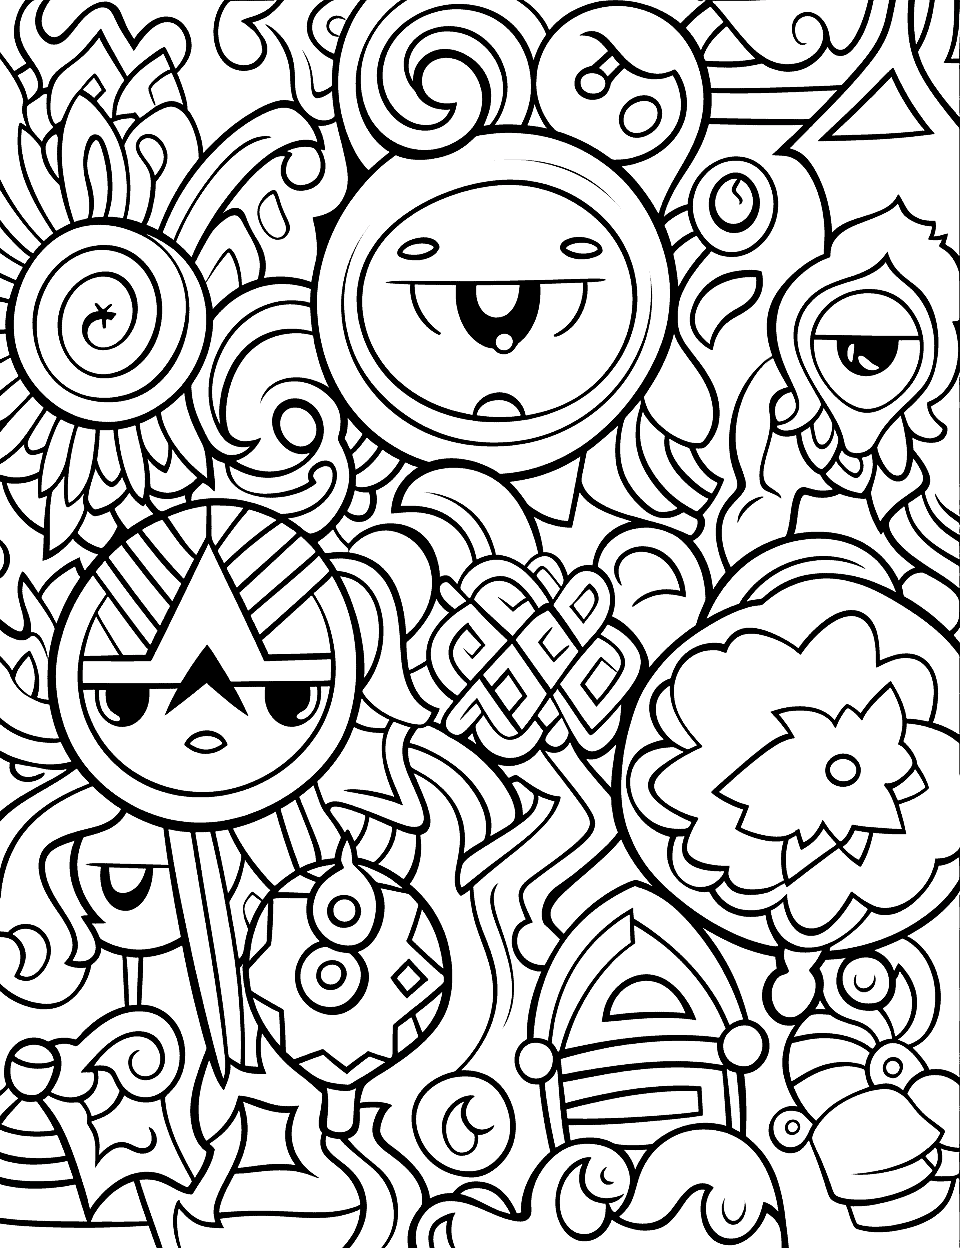 Abstract Design Adult Coloring Page - A page full of abstract patterns with inspired elements from human faces and eyes.